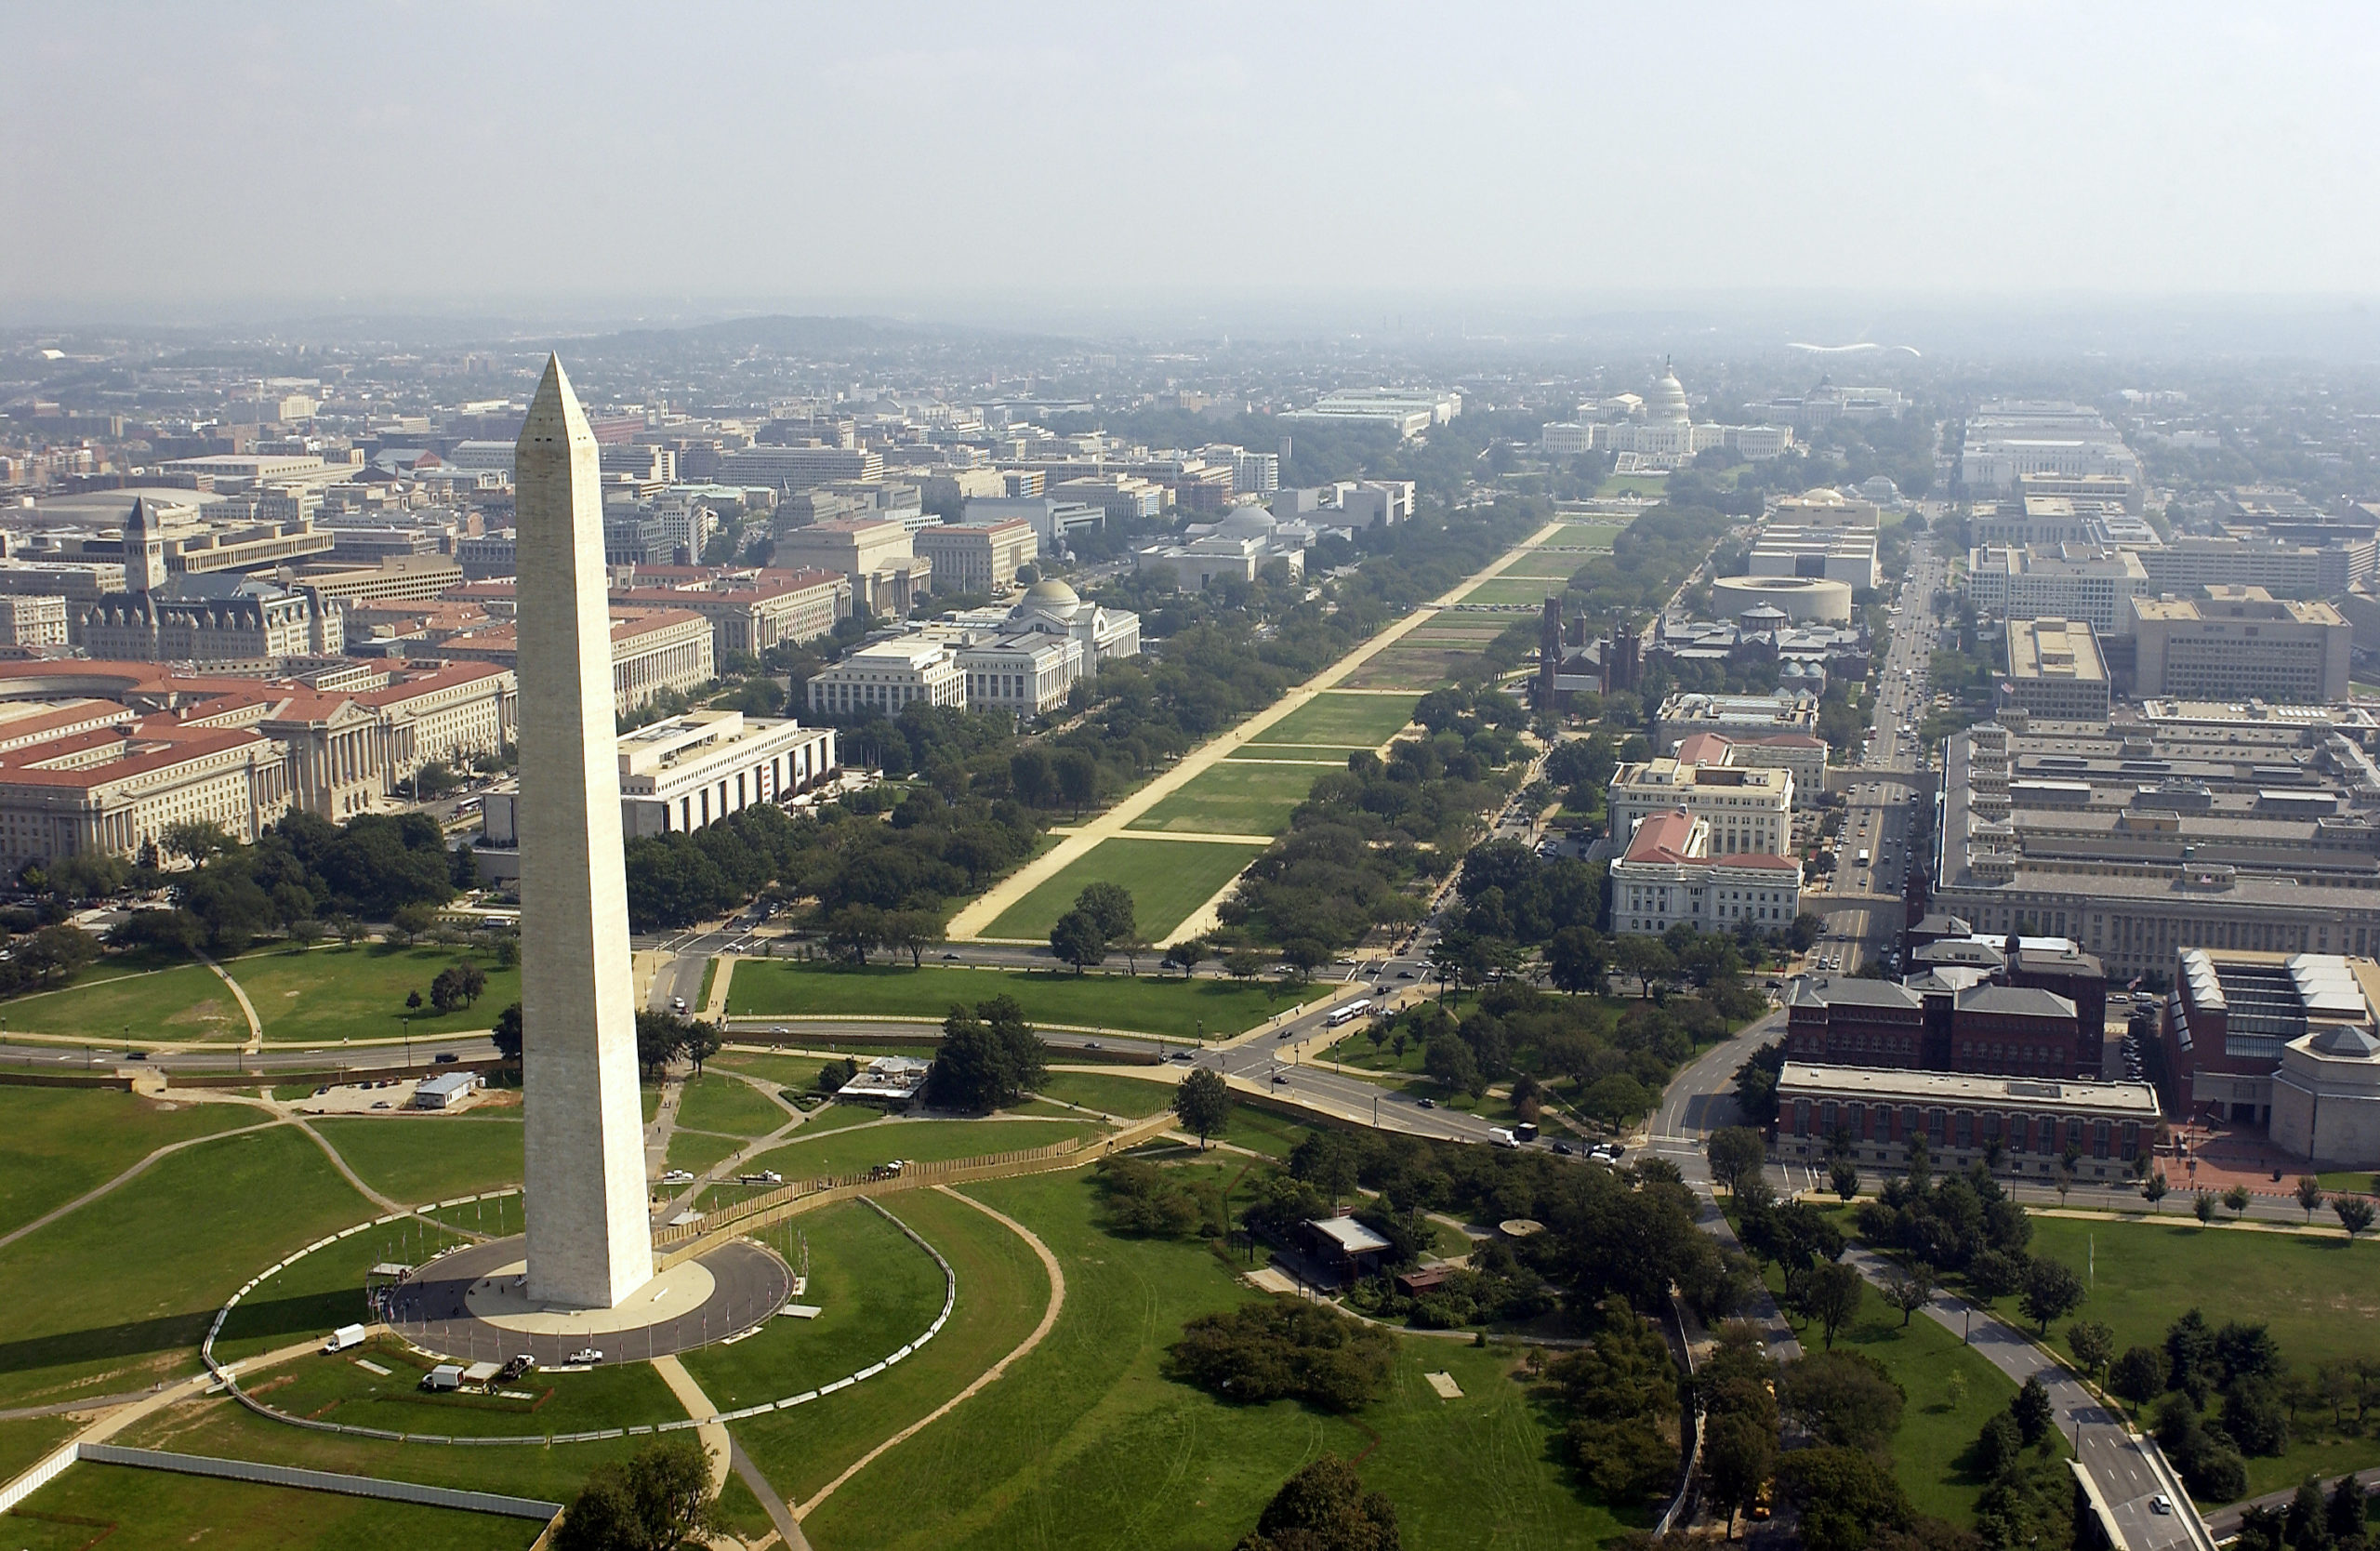 ARLINGTON, VA - SEPTEMBER 26: Aerial photo of the Washington Memorial with the Capitol in the background in Washington D.C. on September 26, 2003. (Photo by Andy Dunaway/USAF via Getty Images)